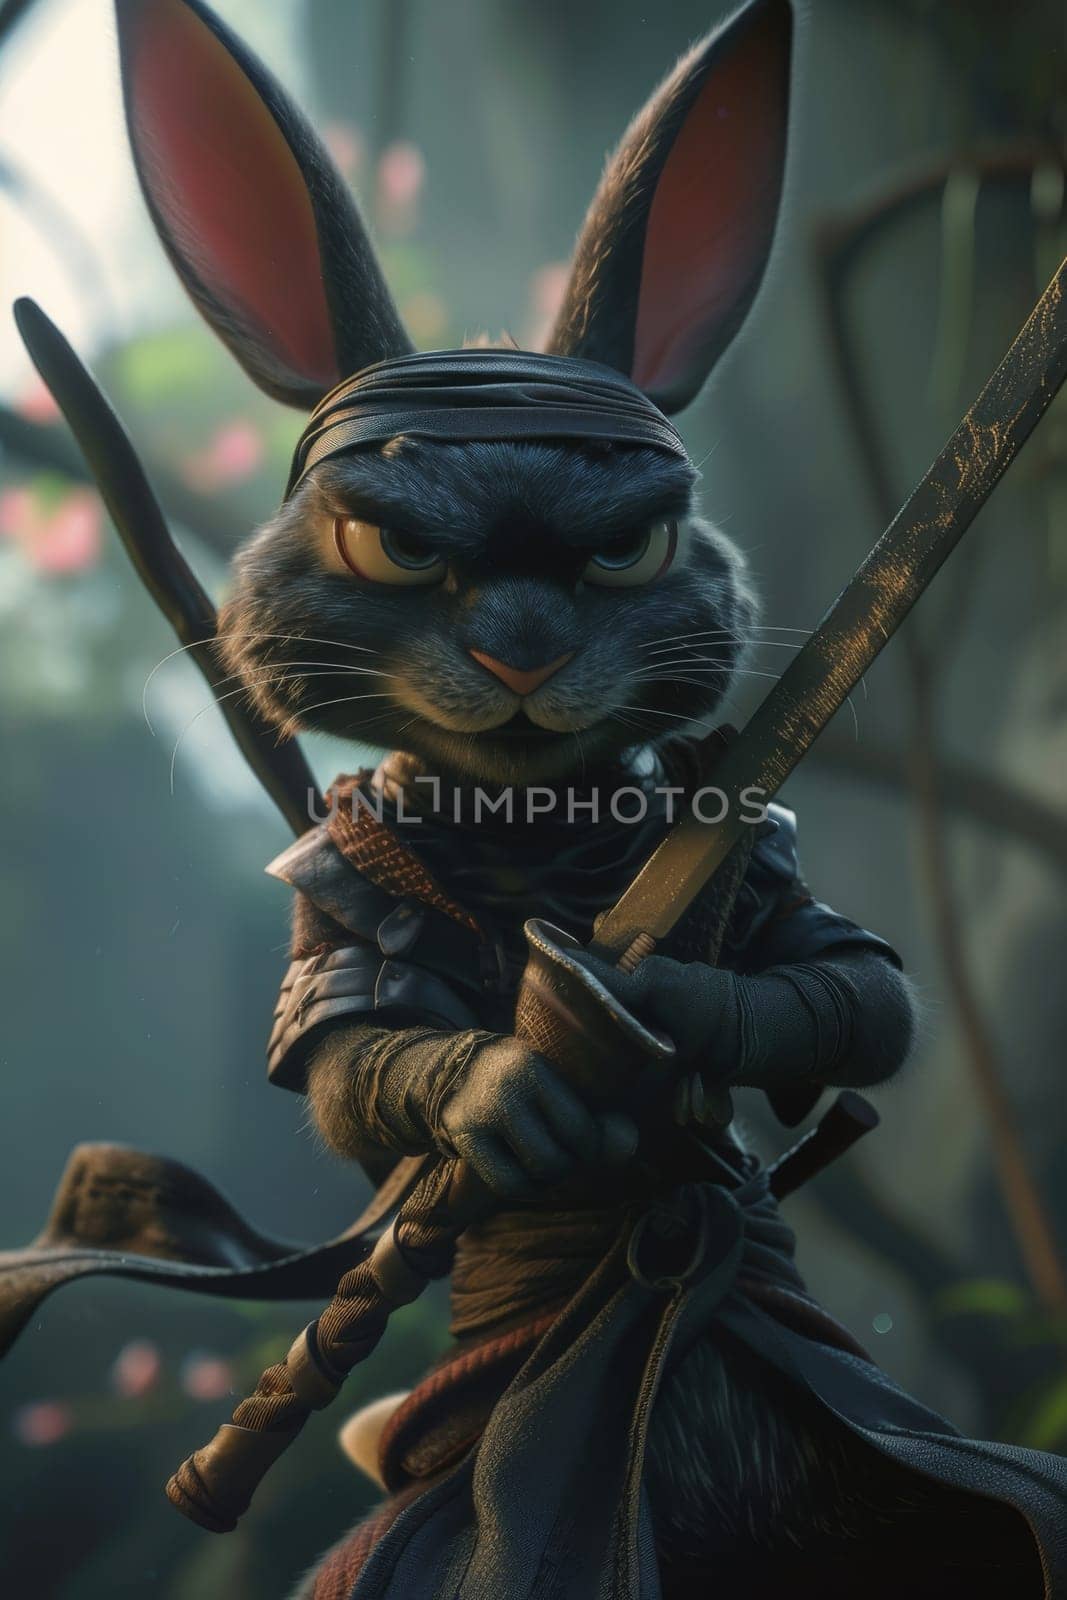 The samurai hare is in the city in the evening. 3d illustration.